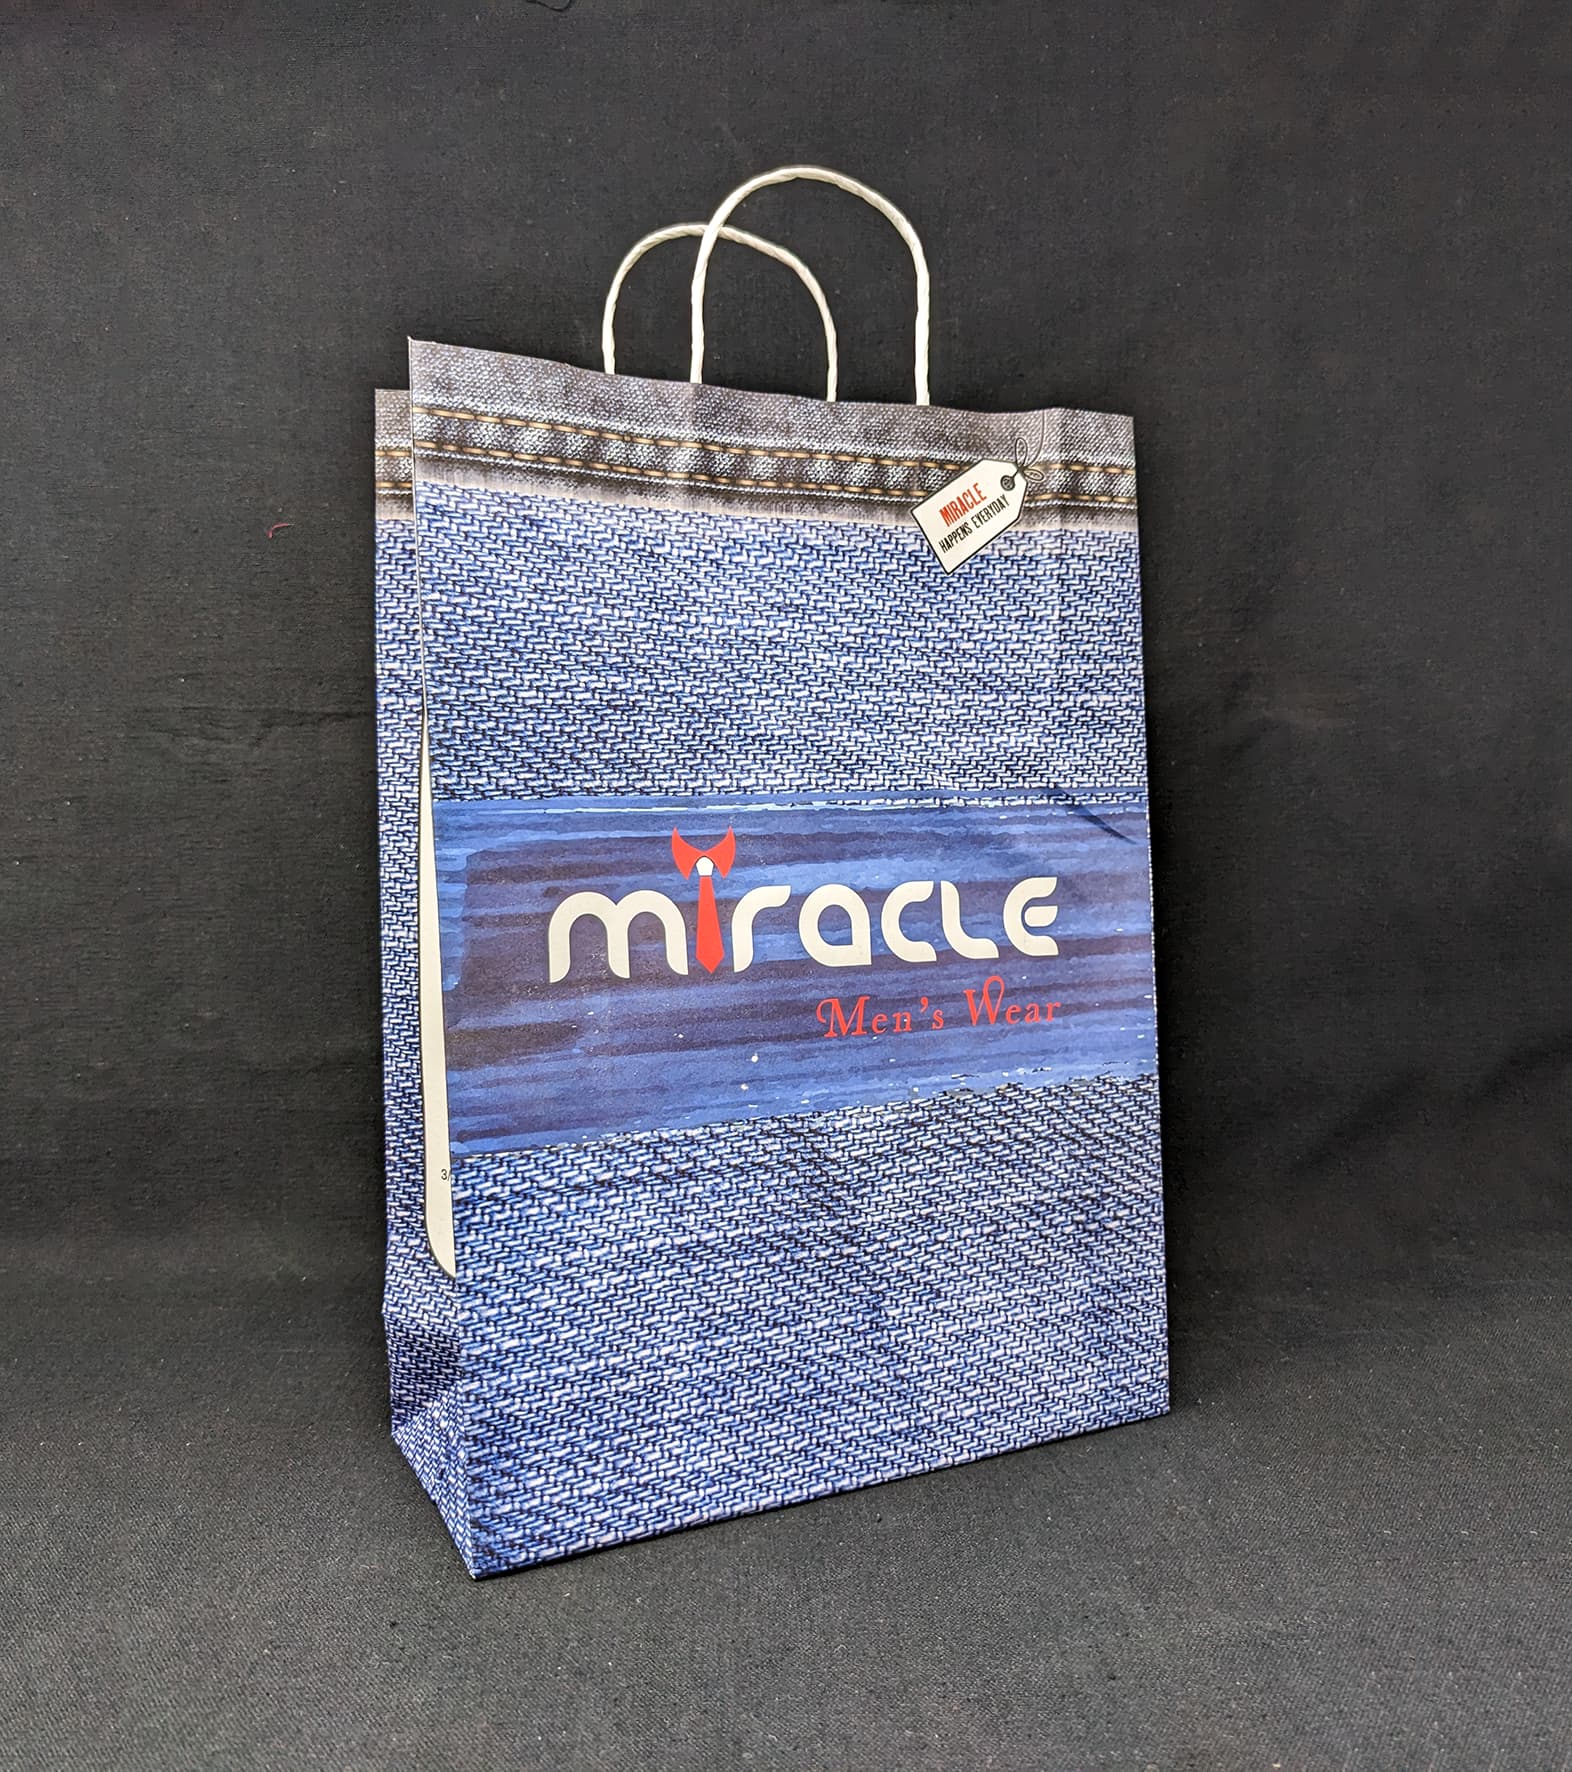 Miracle Bags & Handbags for Women for sale | eBay